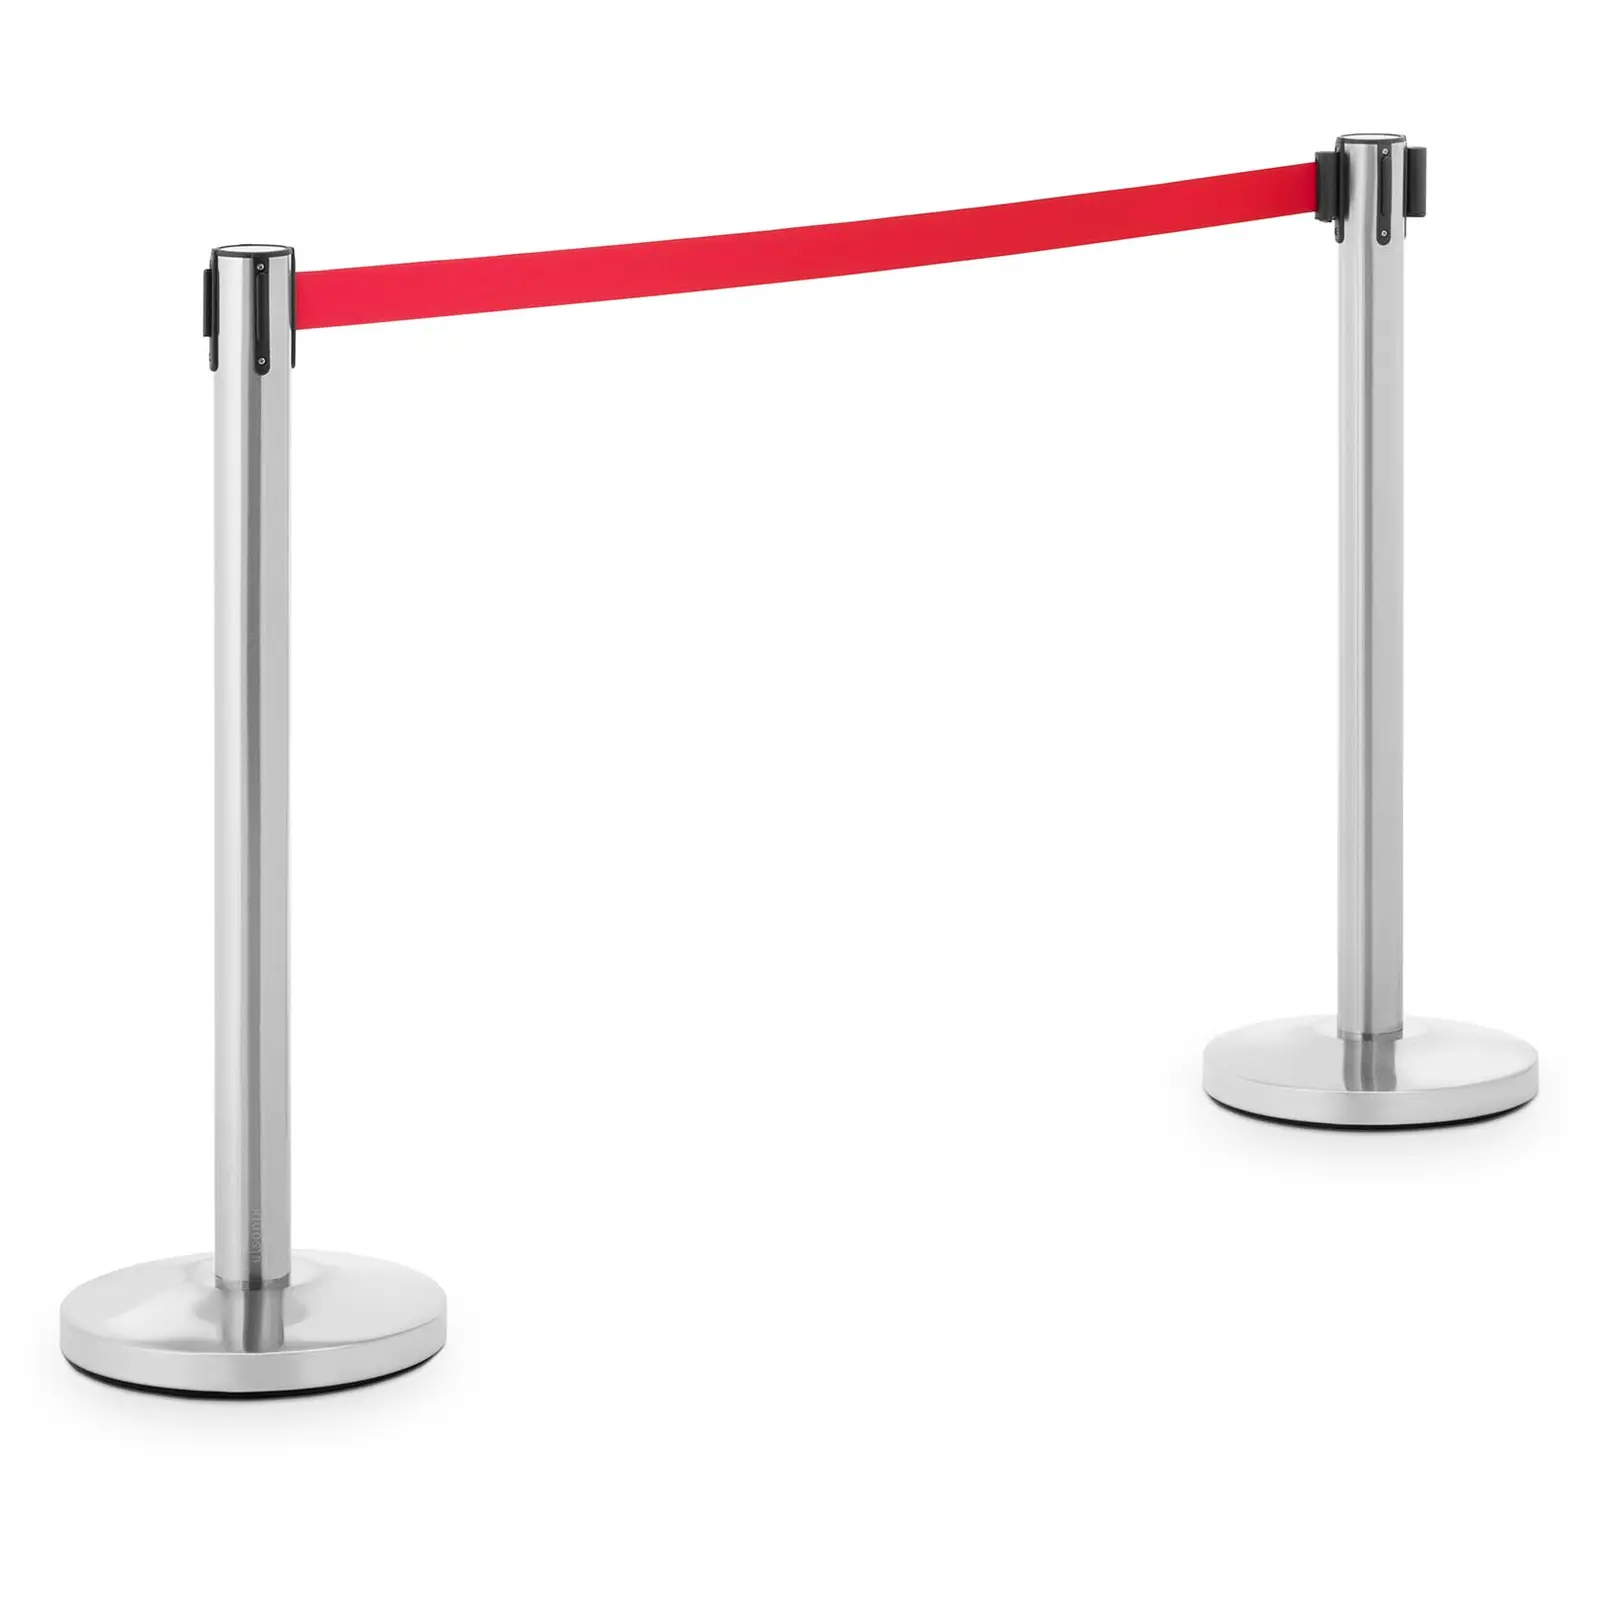 2 Barrier Posts with strap - 200 cm - brushed stainless steel